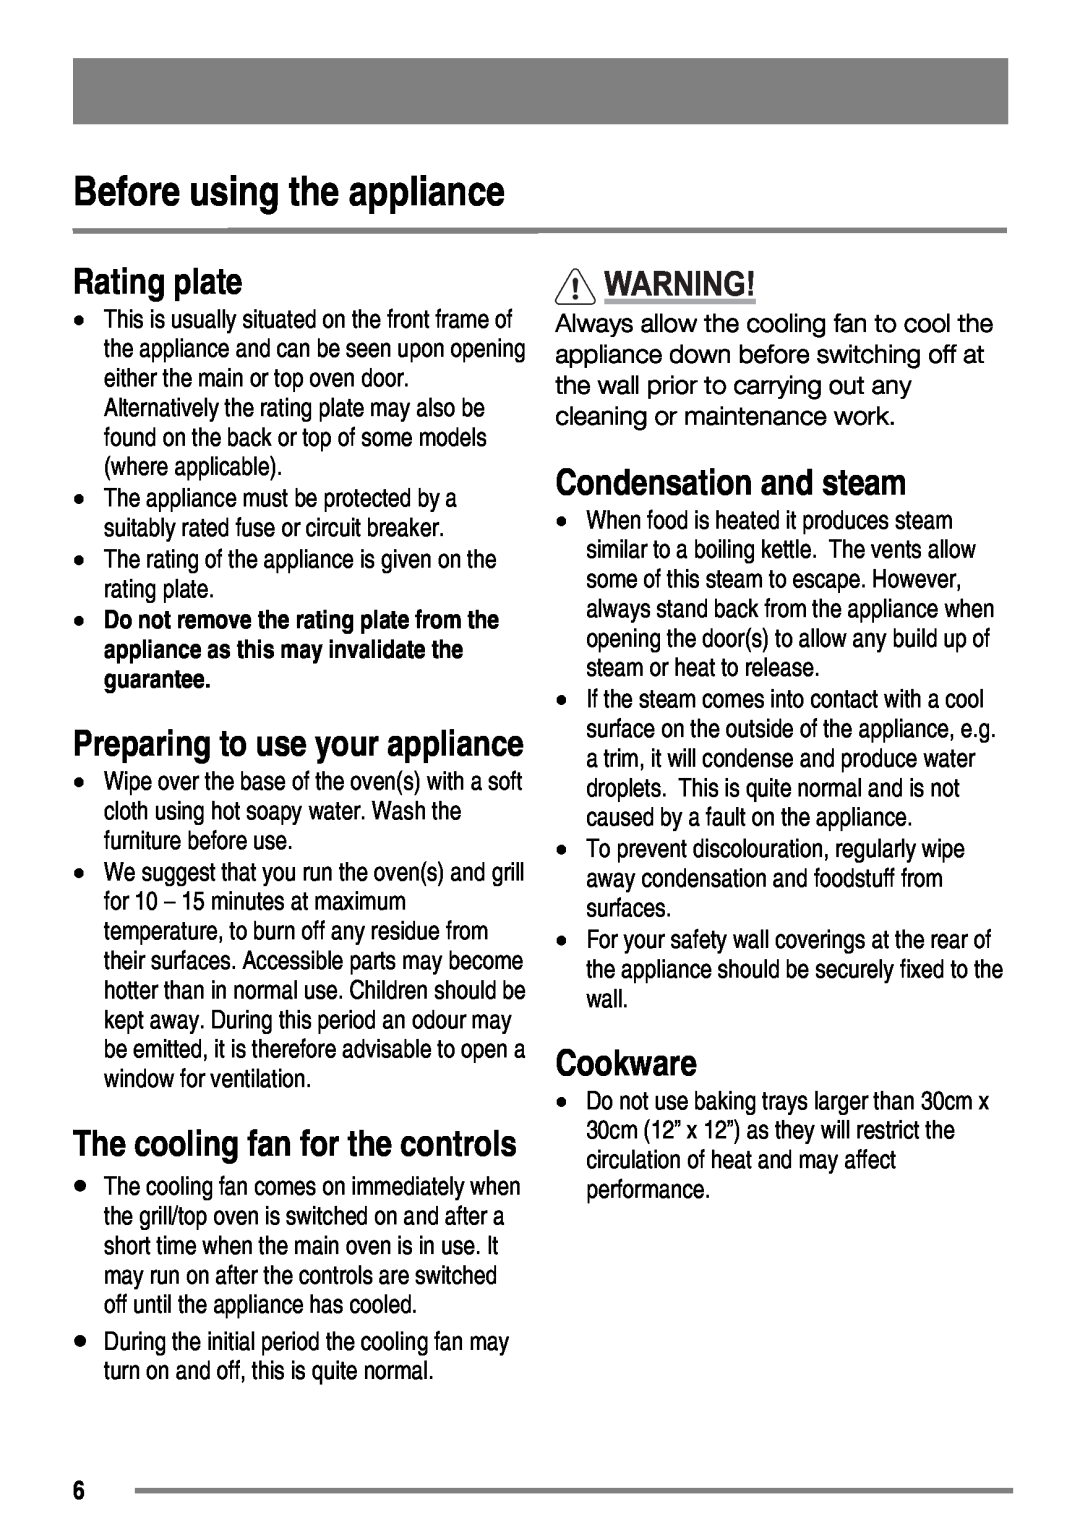 Zanussi ZKG6010 user manual Before using the appliance, Rating plate, Cookware, The cooling fan for the controls 